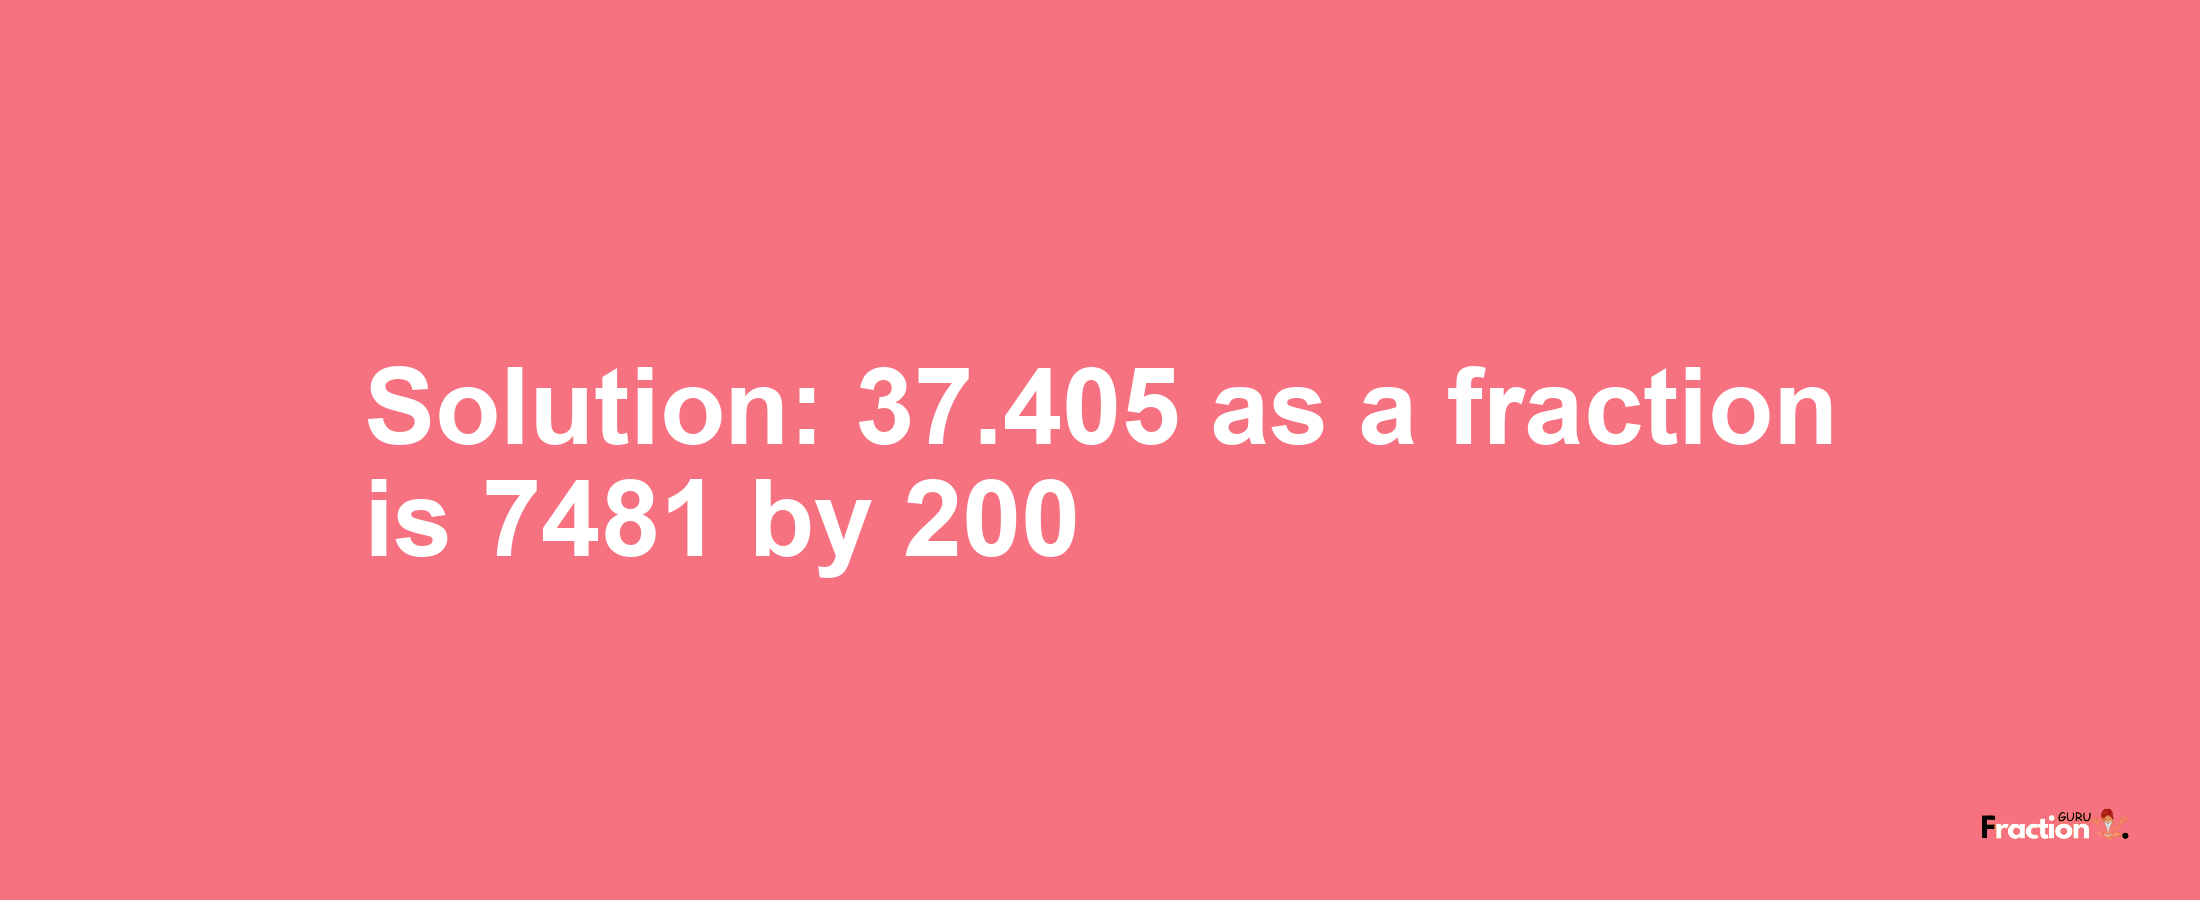 Solution:37.405 as a fraction is 7481/200